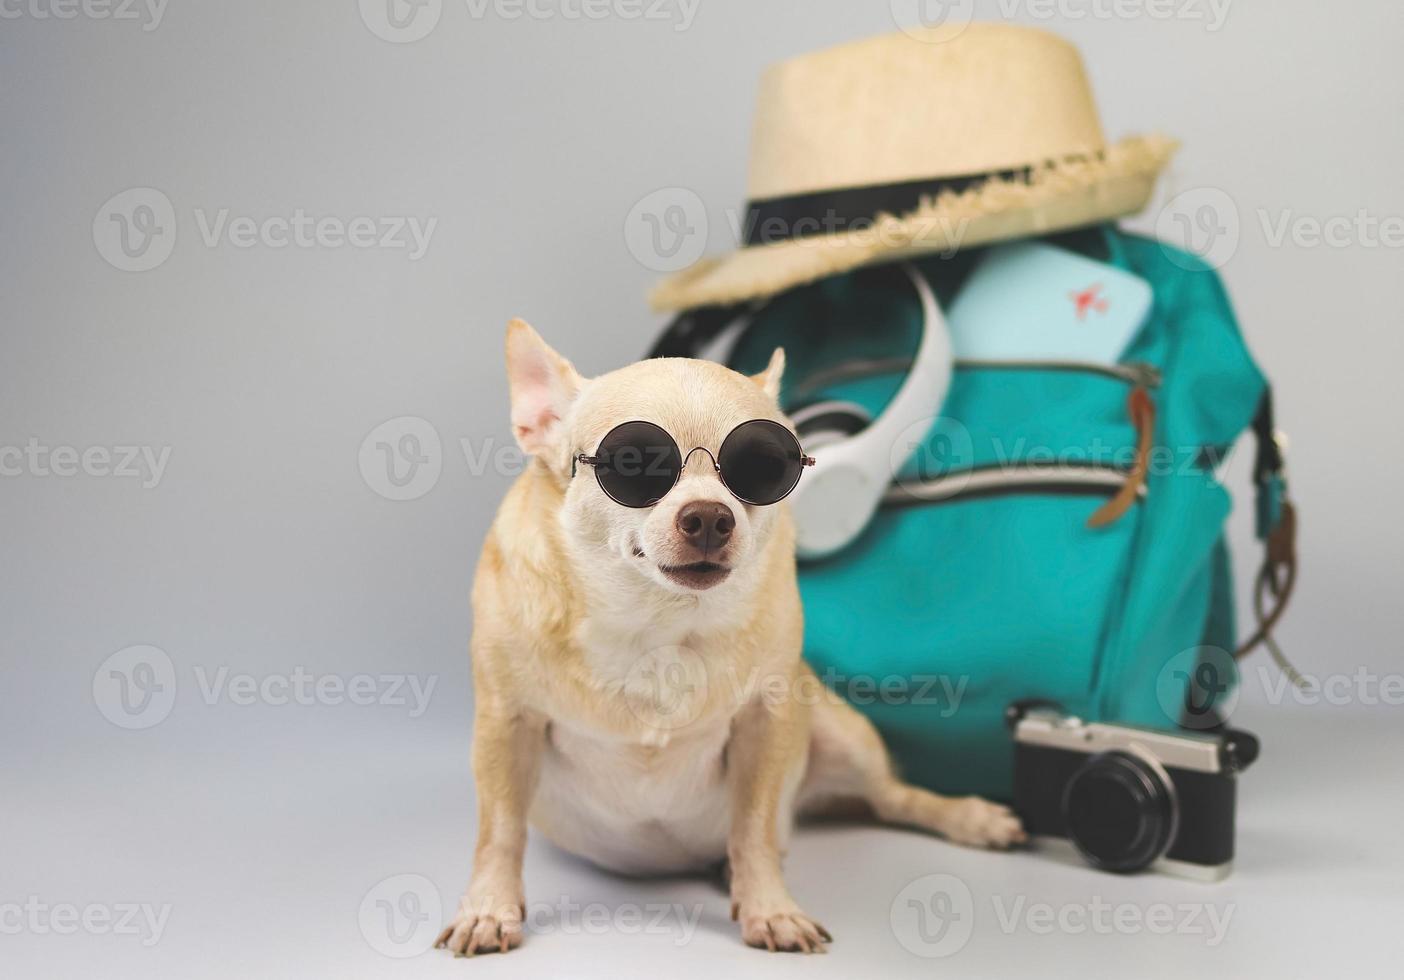 cute brown short hair chihuahua dog wearing sunglasses sitting  on white  background with travel accessories, camera, backpack, passport,  headphones and straw hat. travelling  with animal concept. photo